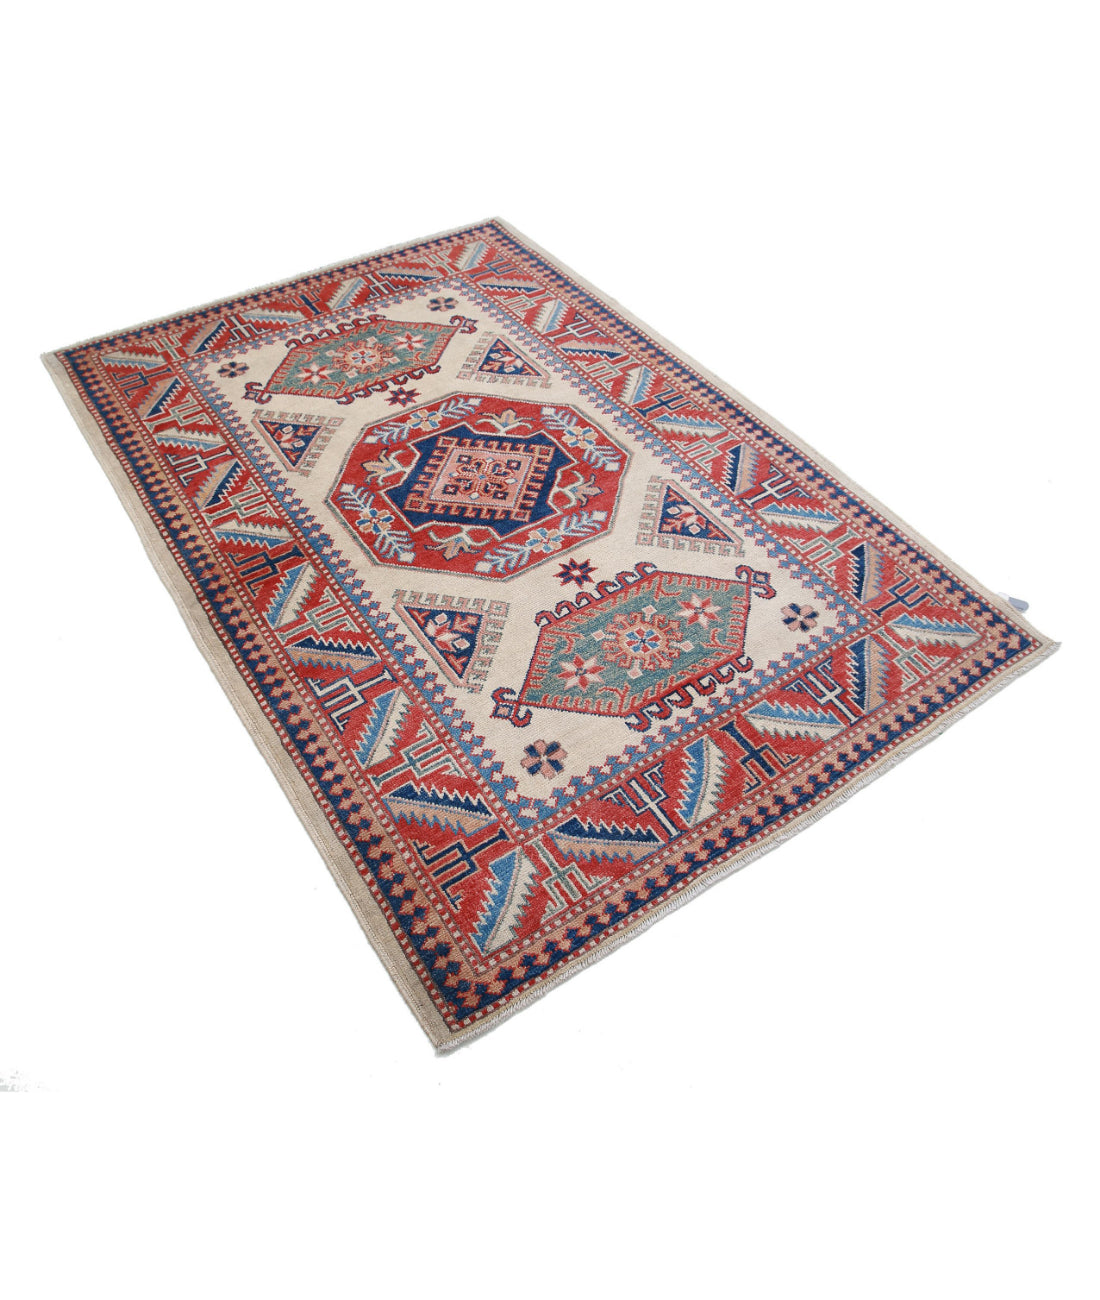 Hand Knotted Tribal Kazak Wool Rug - 4'2'' x 6'0'' 4'2'' x 6'0'' (125 X 180) / Ivory / Red